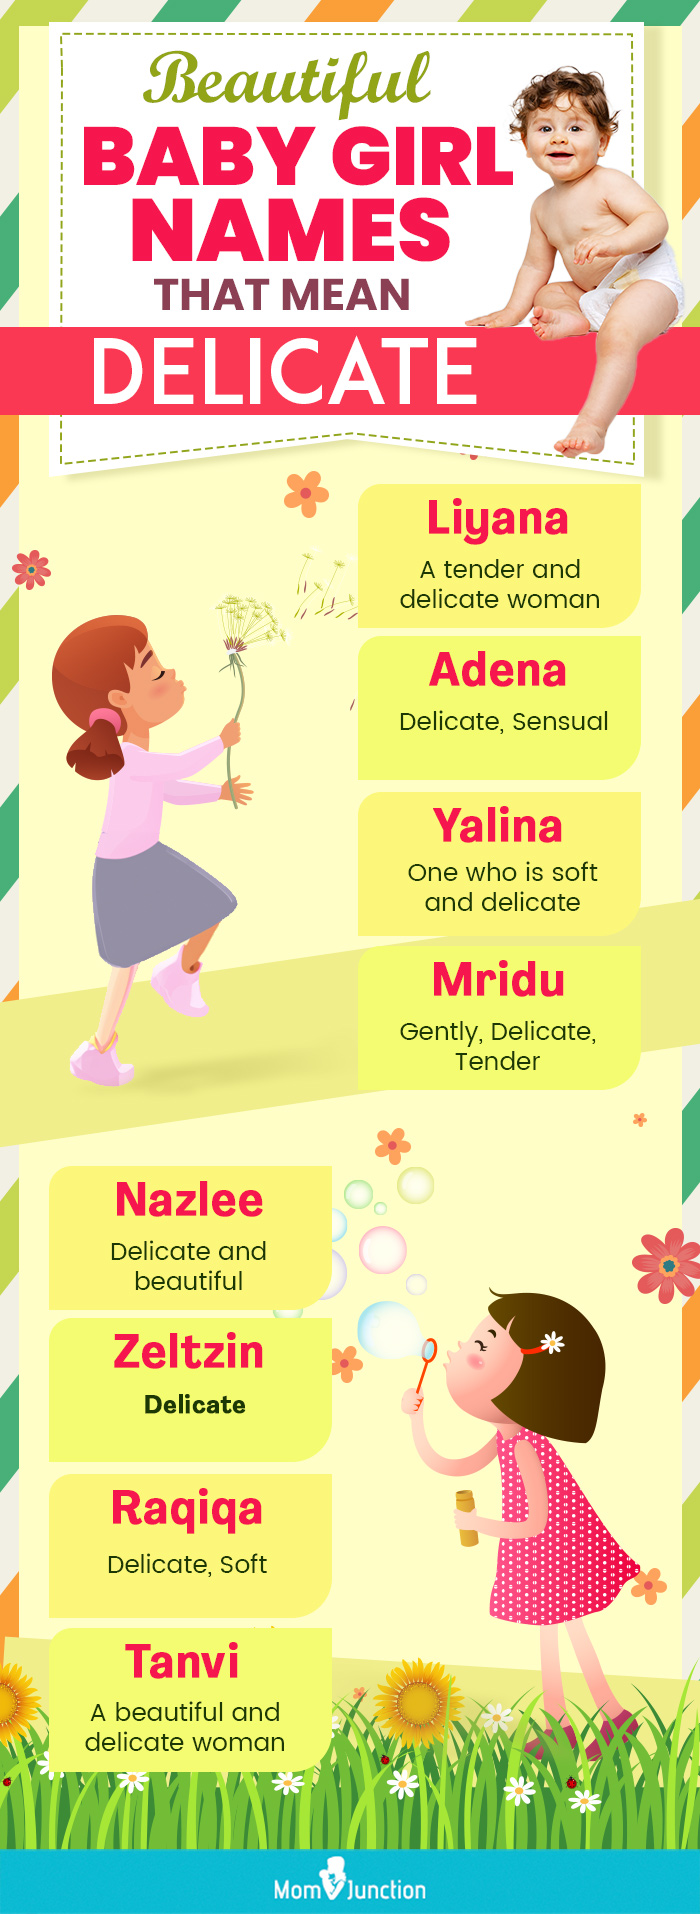 beautiful baby girl names that mean delicate (infographic)